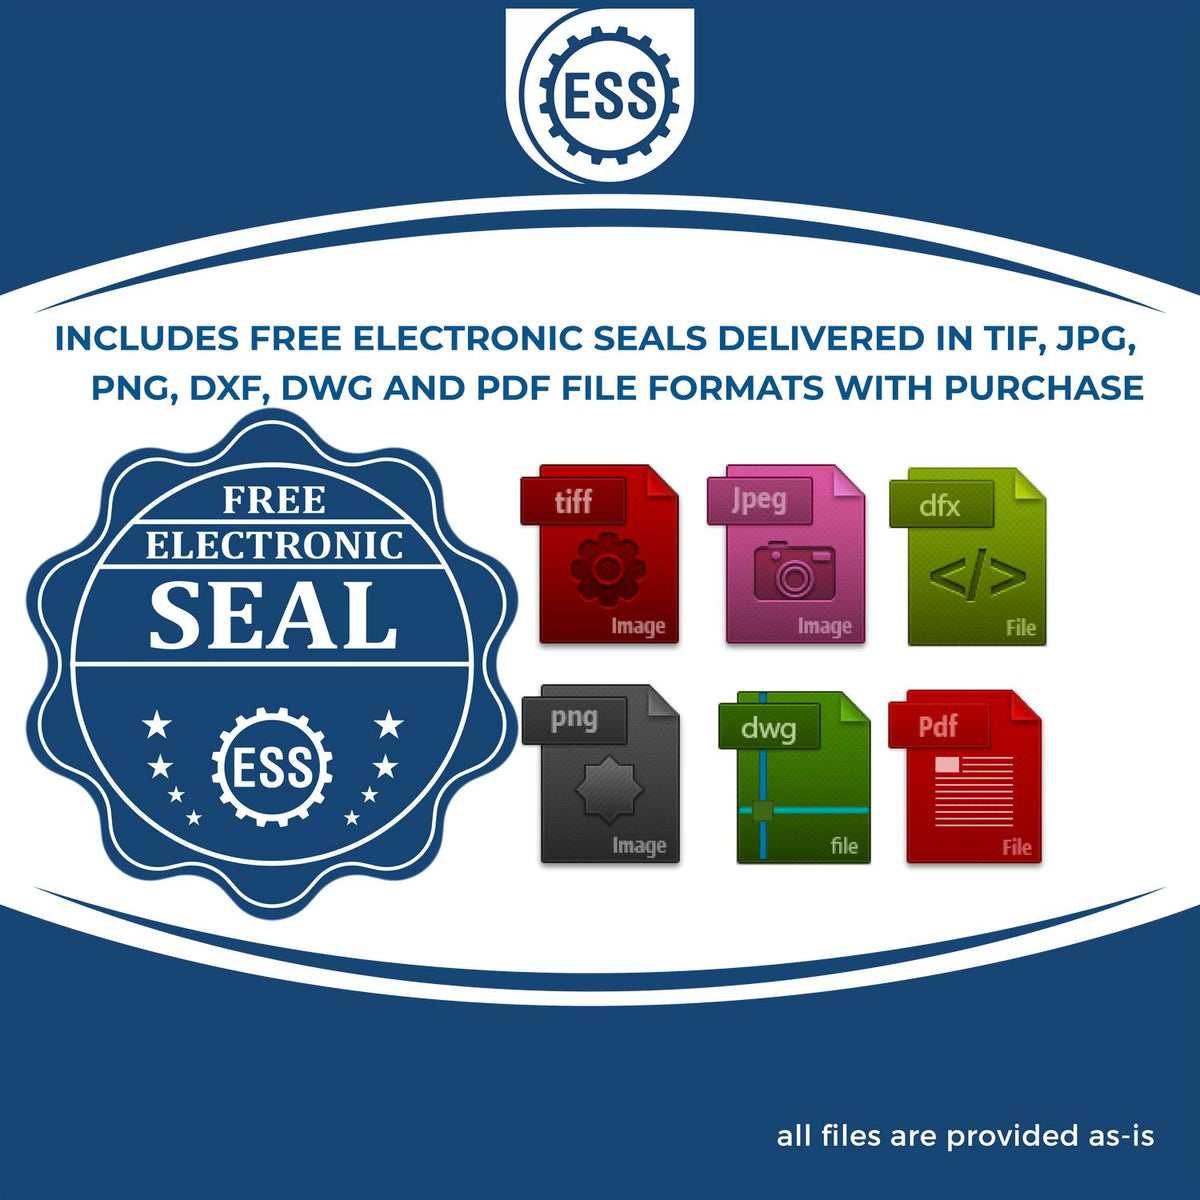 An infographic for the free electronic seal for the PSI Florida Notary Stamp illustrating the different file type icons such as DXF, DWG, TIF, JPG and PNG.